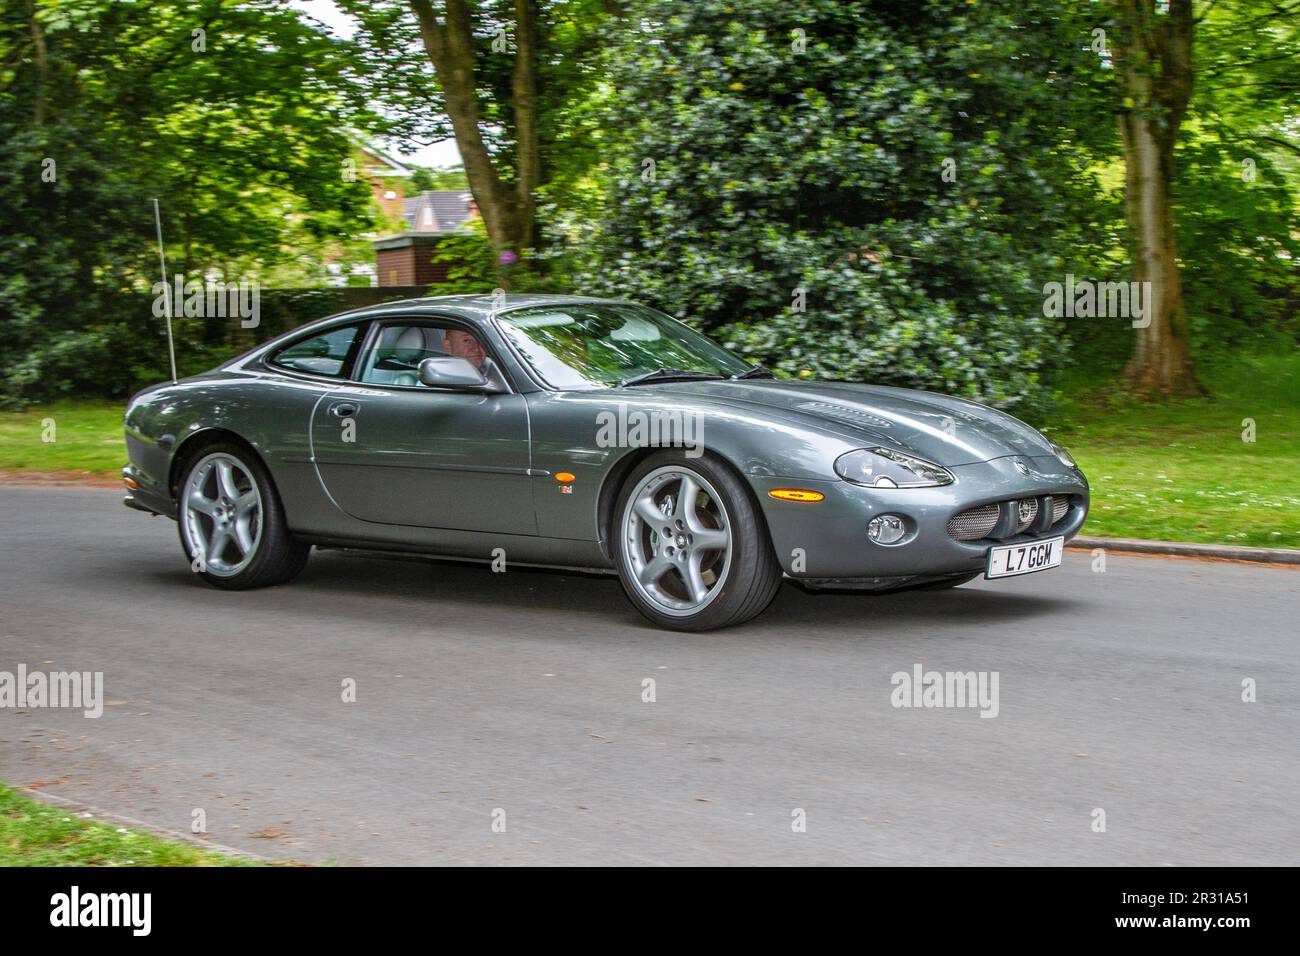 2003 Grey British Jaguar Xkr Coupe Auto V8 S/C Auto Car Coupe Petrol 4196 cc; at the Lytham St Annes Classic & Performance Motor vehicle show displays of classic cars, UK Stock Photo